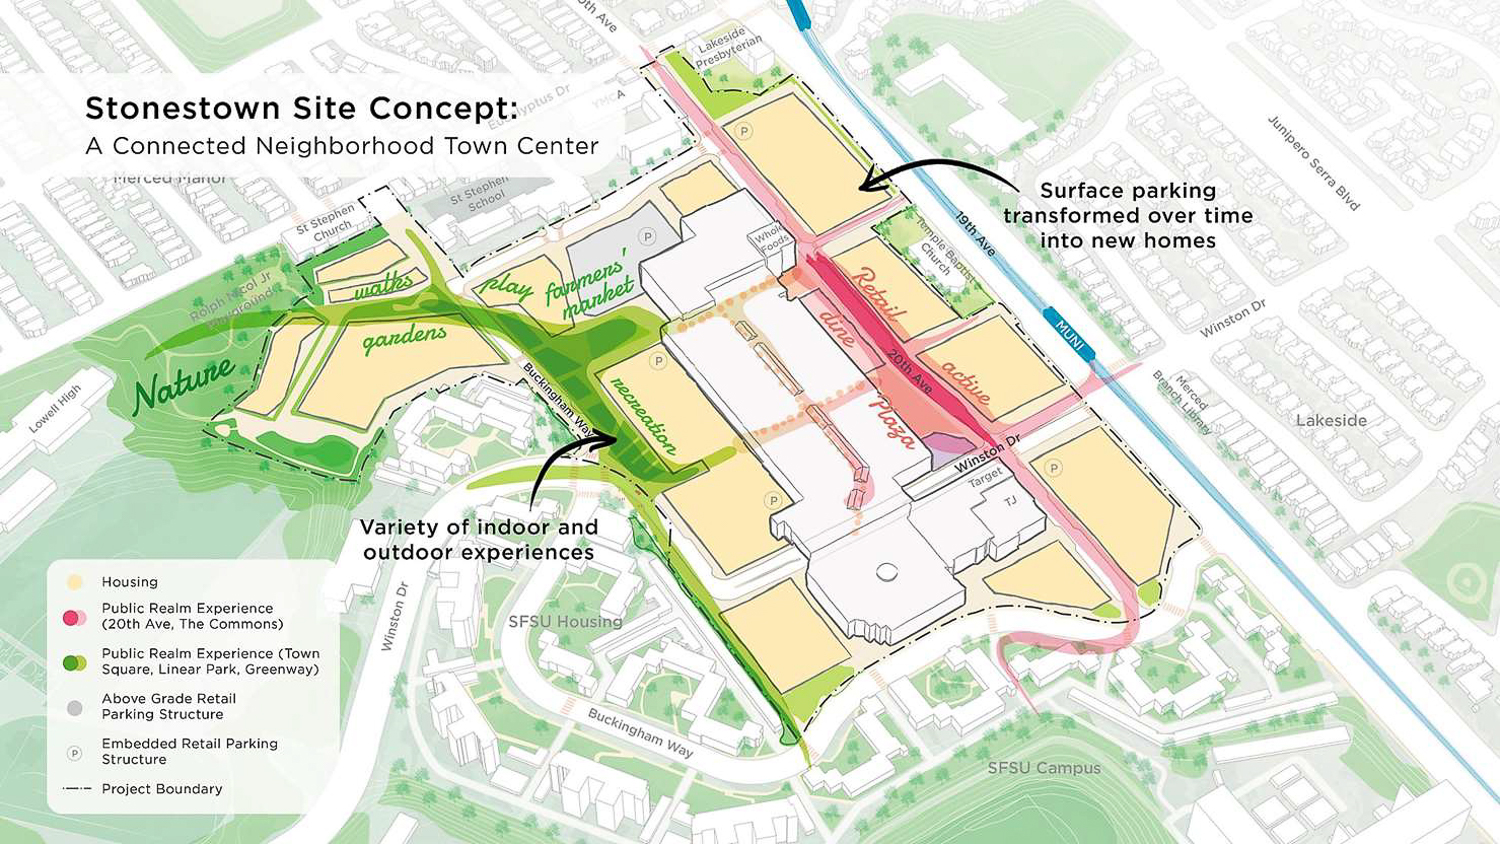 Stonestown Mall conceptual land use proposal, illustration courtesy Brookfield